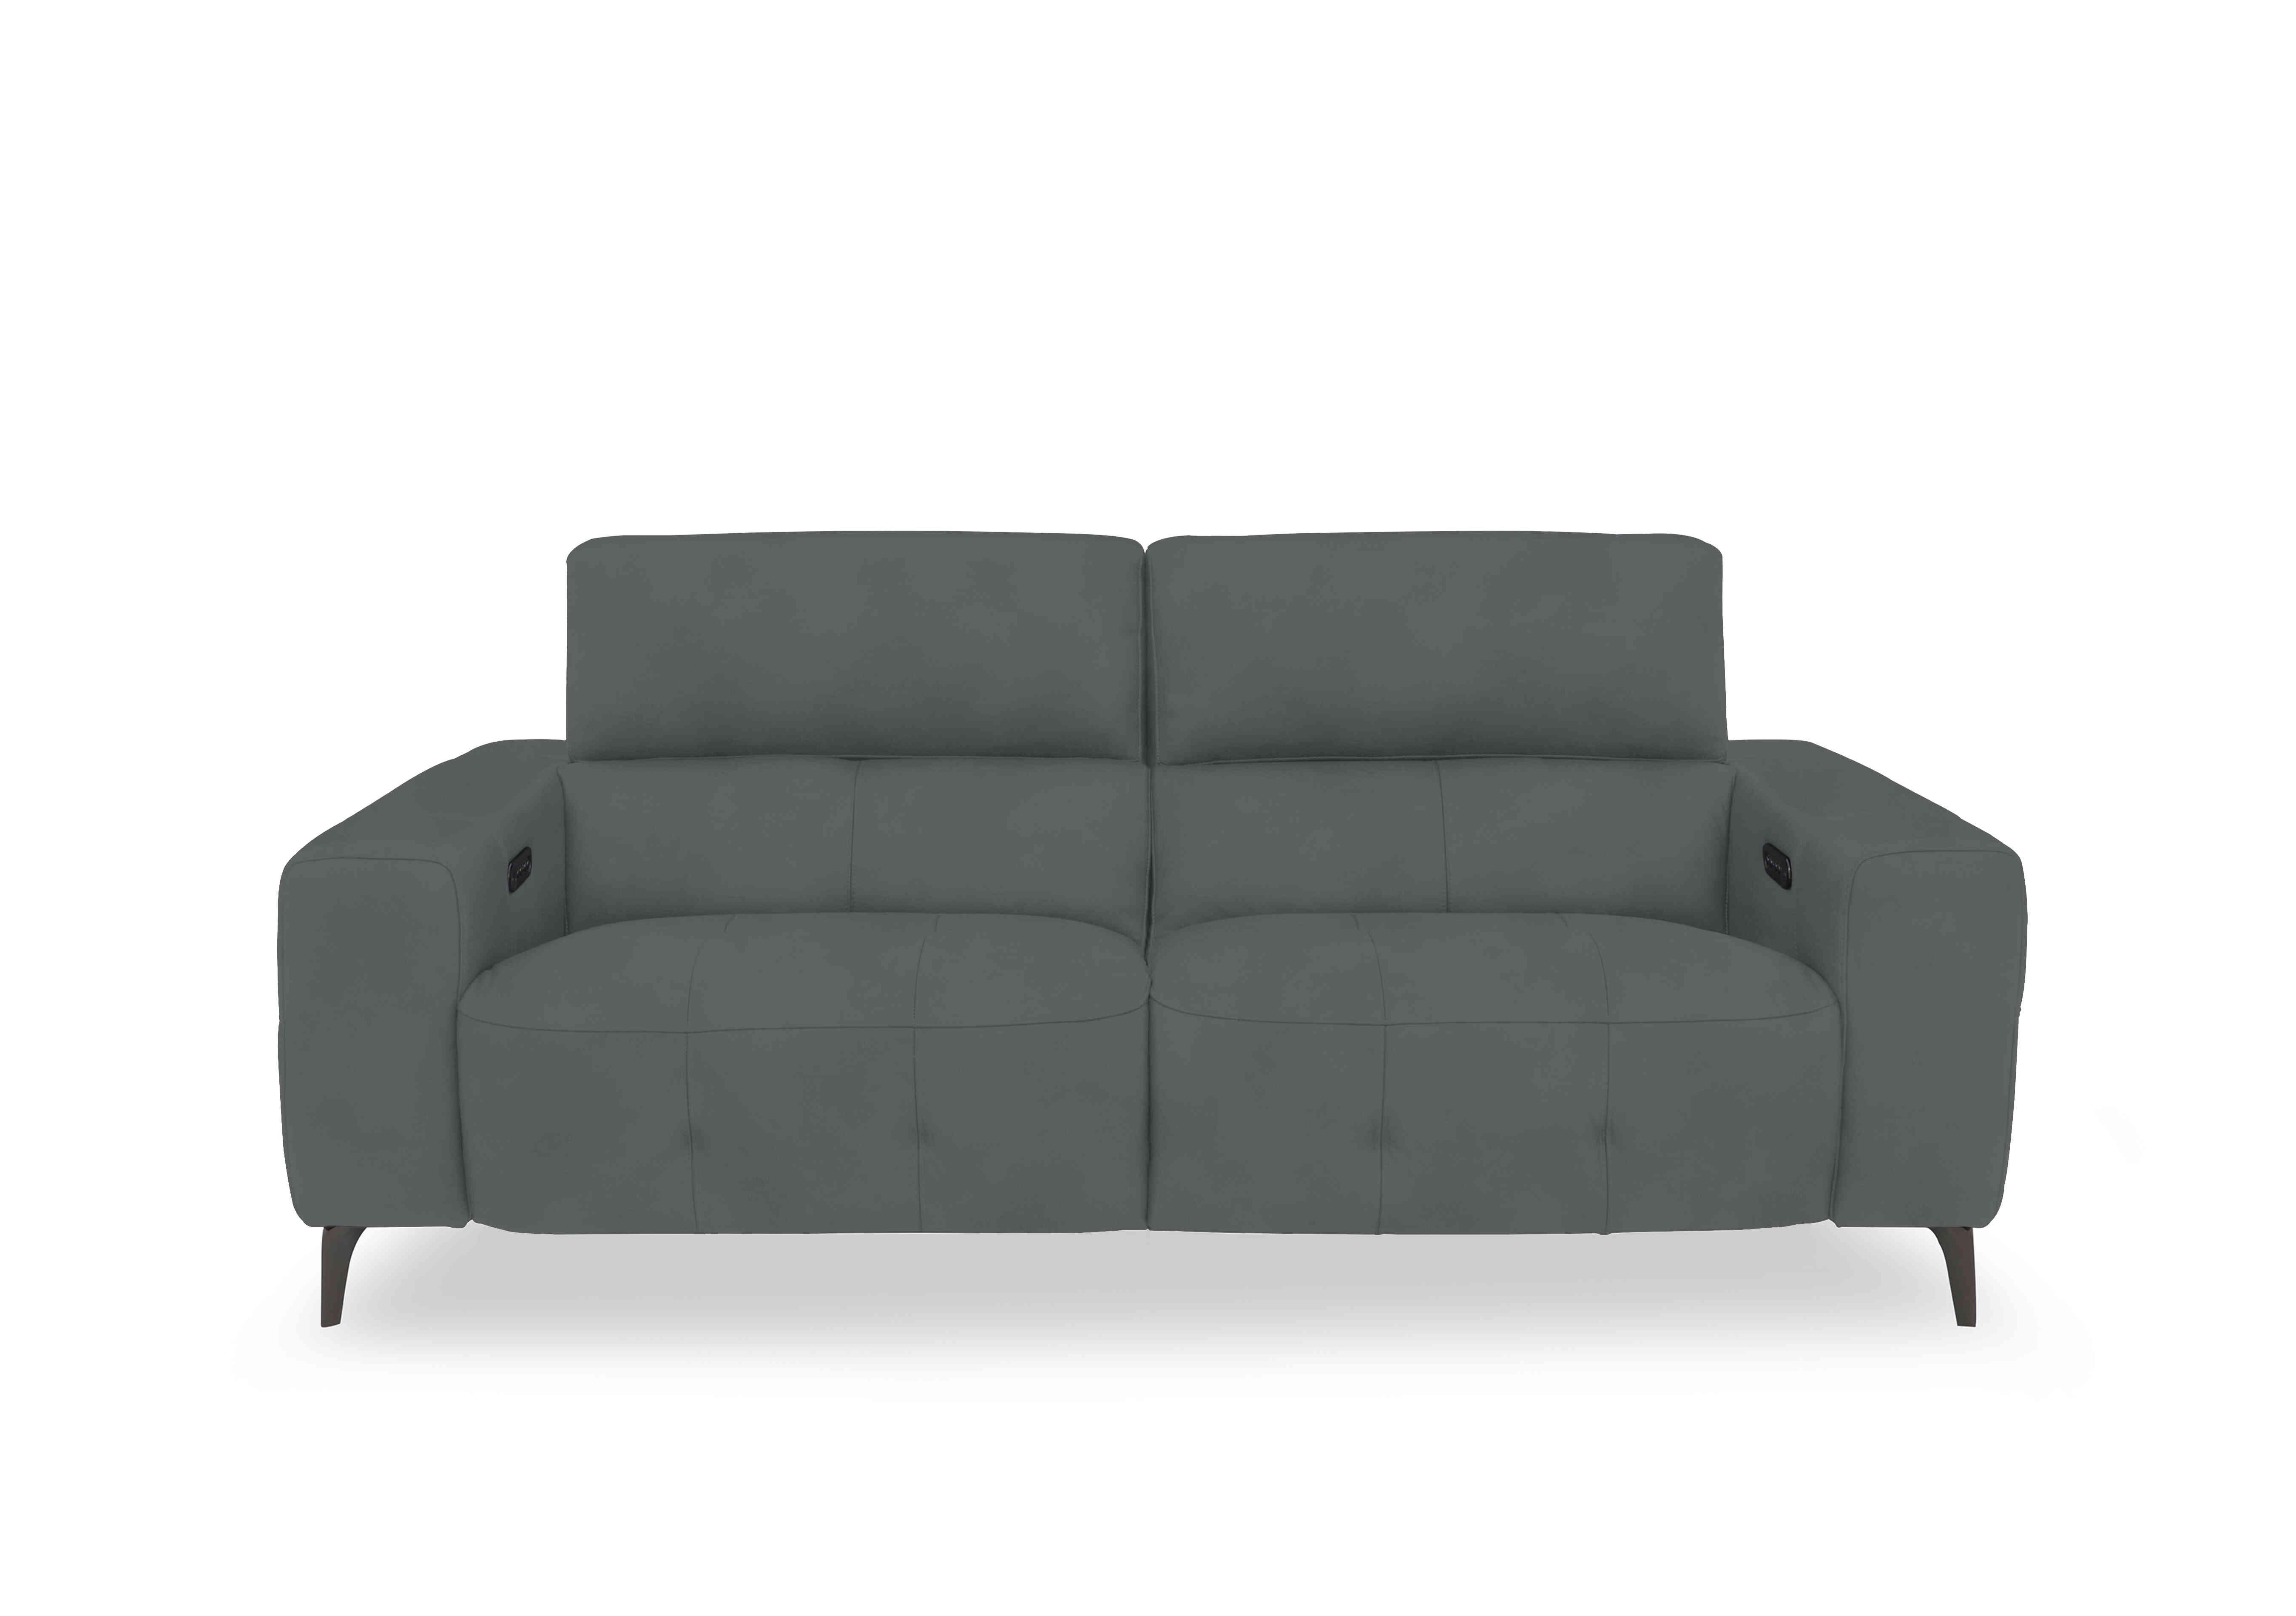 New York 3 Seater Fabric Sofa in Fab-Meg-R20 Pewter on Furniture Village